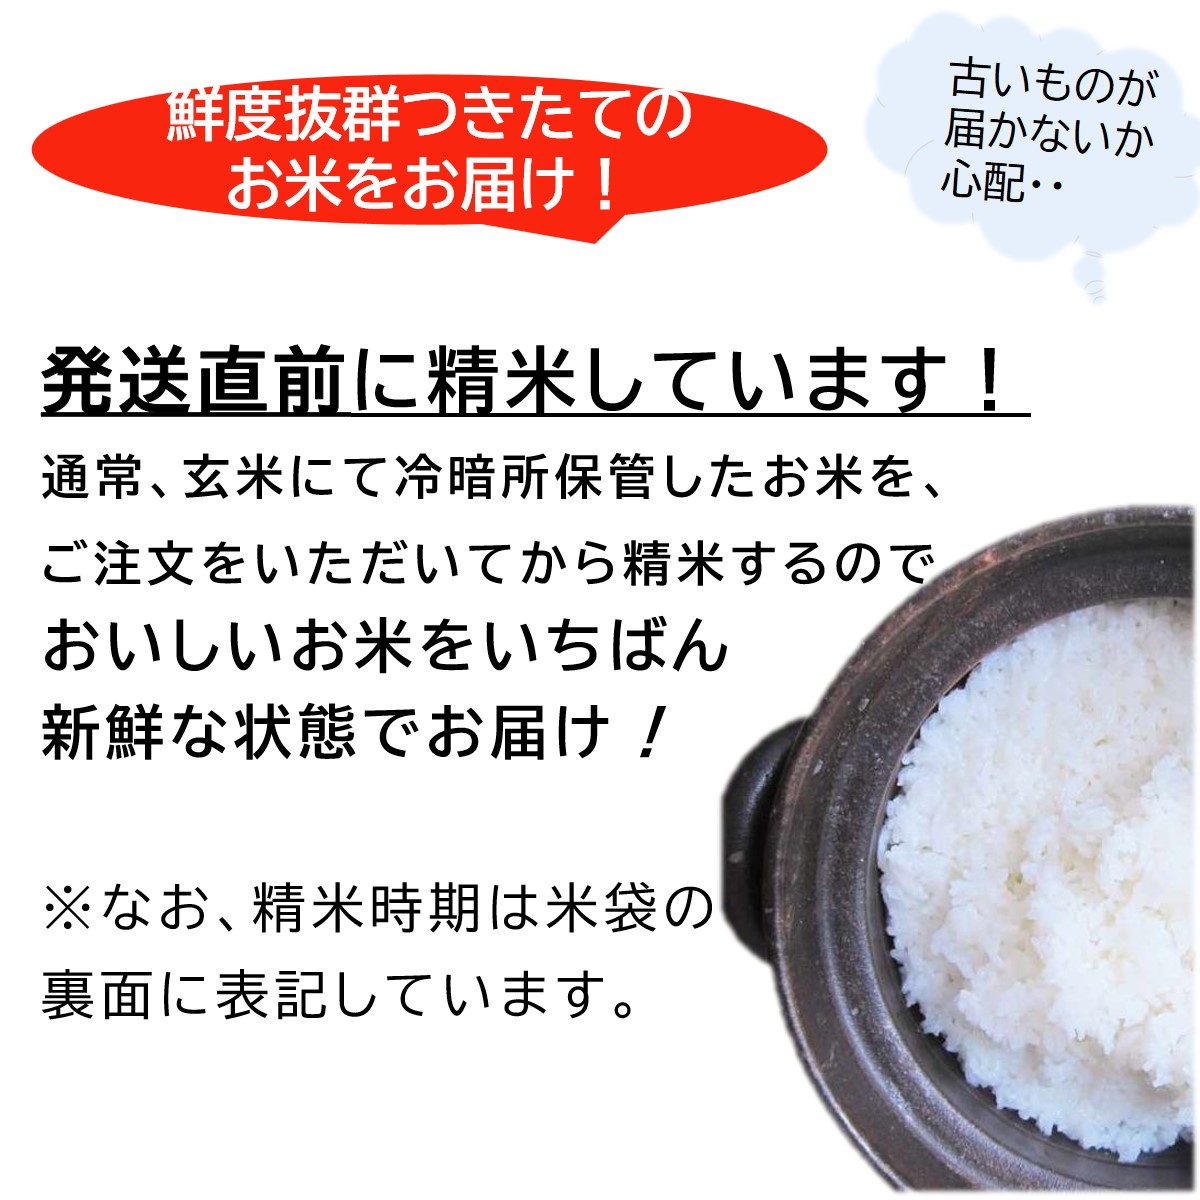 5 year production mochi rice glutinous rice 900g(6. minute ) agriculture house direct delivery Kagura mochi1kg and downward . rice three-ply prefecture production . pesticide ... glutinous rice god comfort mochi mail service mochi mochi ... shop 